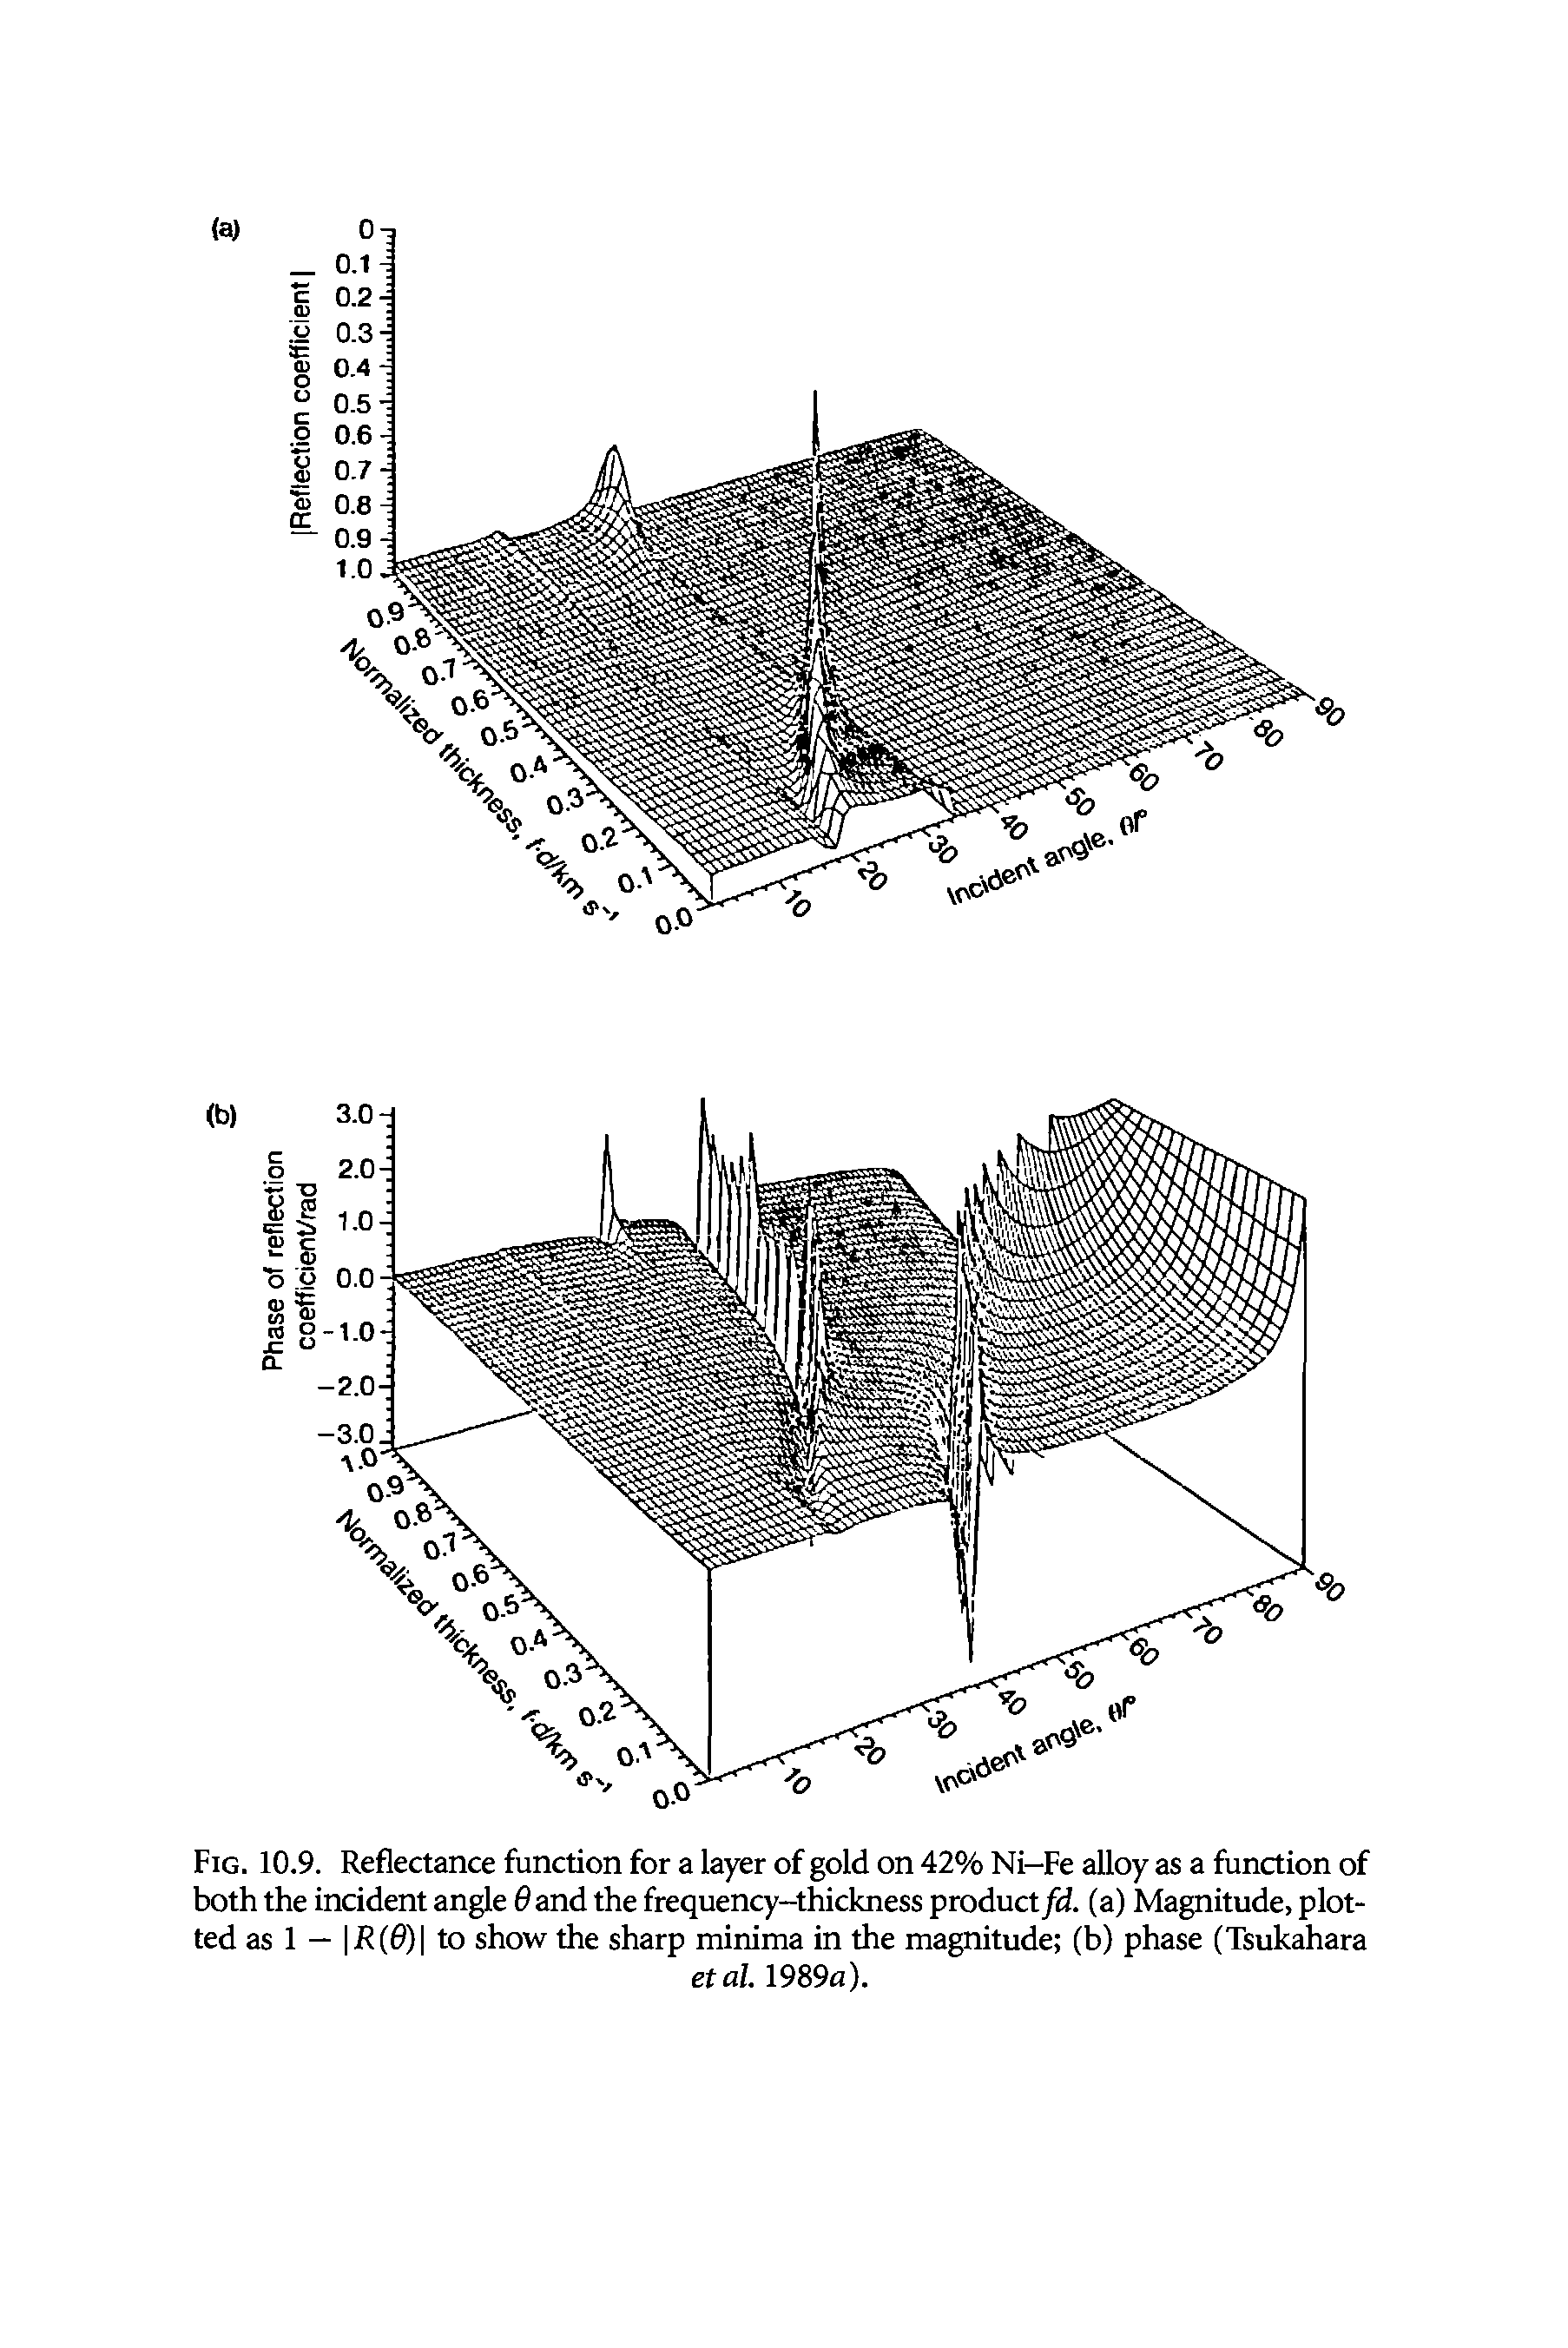 Fig. 10.9. Reflectance function for a layer of gold on 42% Ni-Fe alloy as a function of both the incident angle fland the frequency-thickness product fd. (a) Magnitude, plotted as 1 — (601 to show the sharp minima in the magnitude (b) phase (Tsukahara...